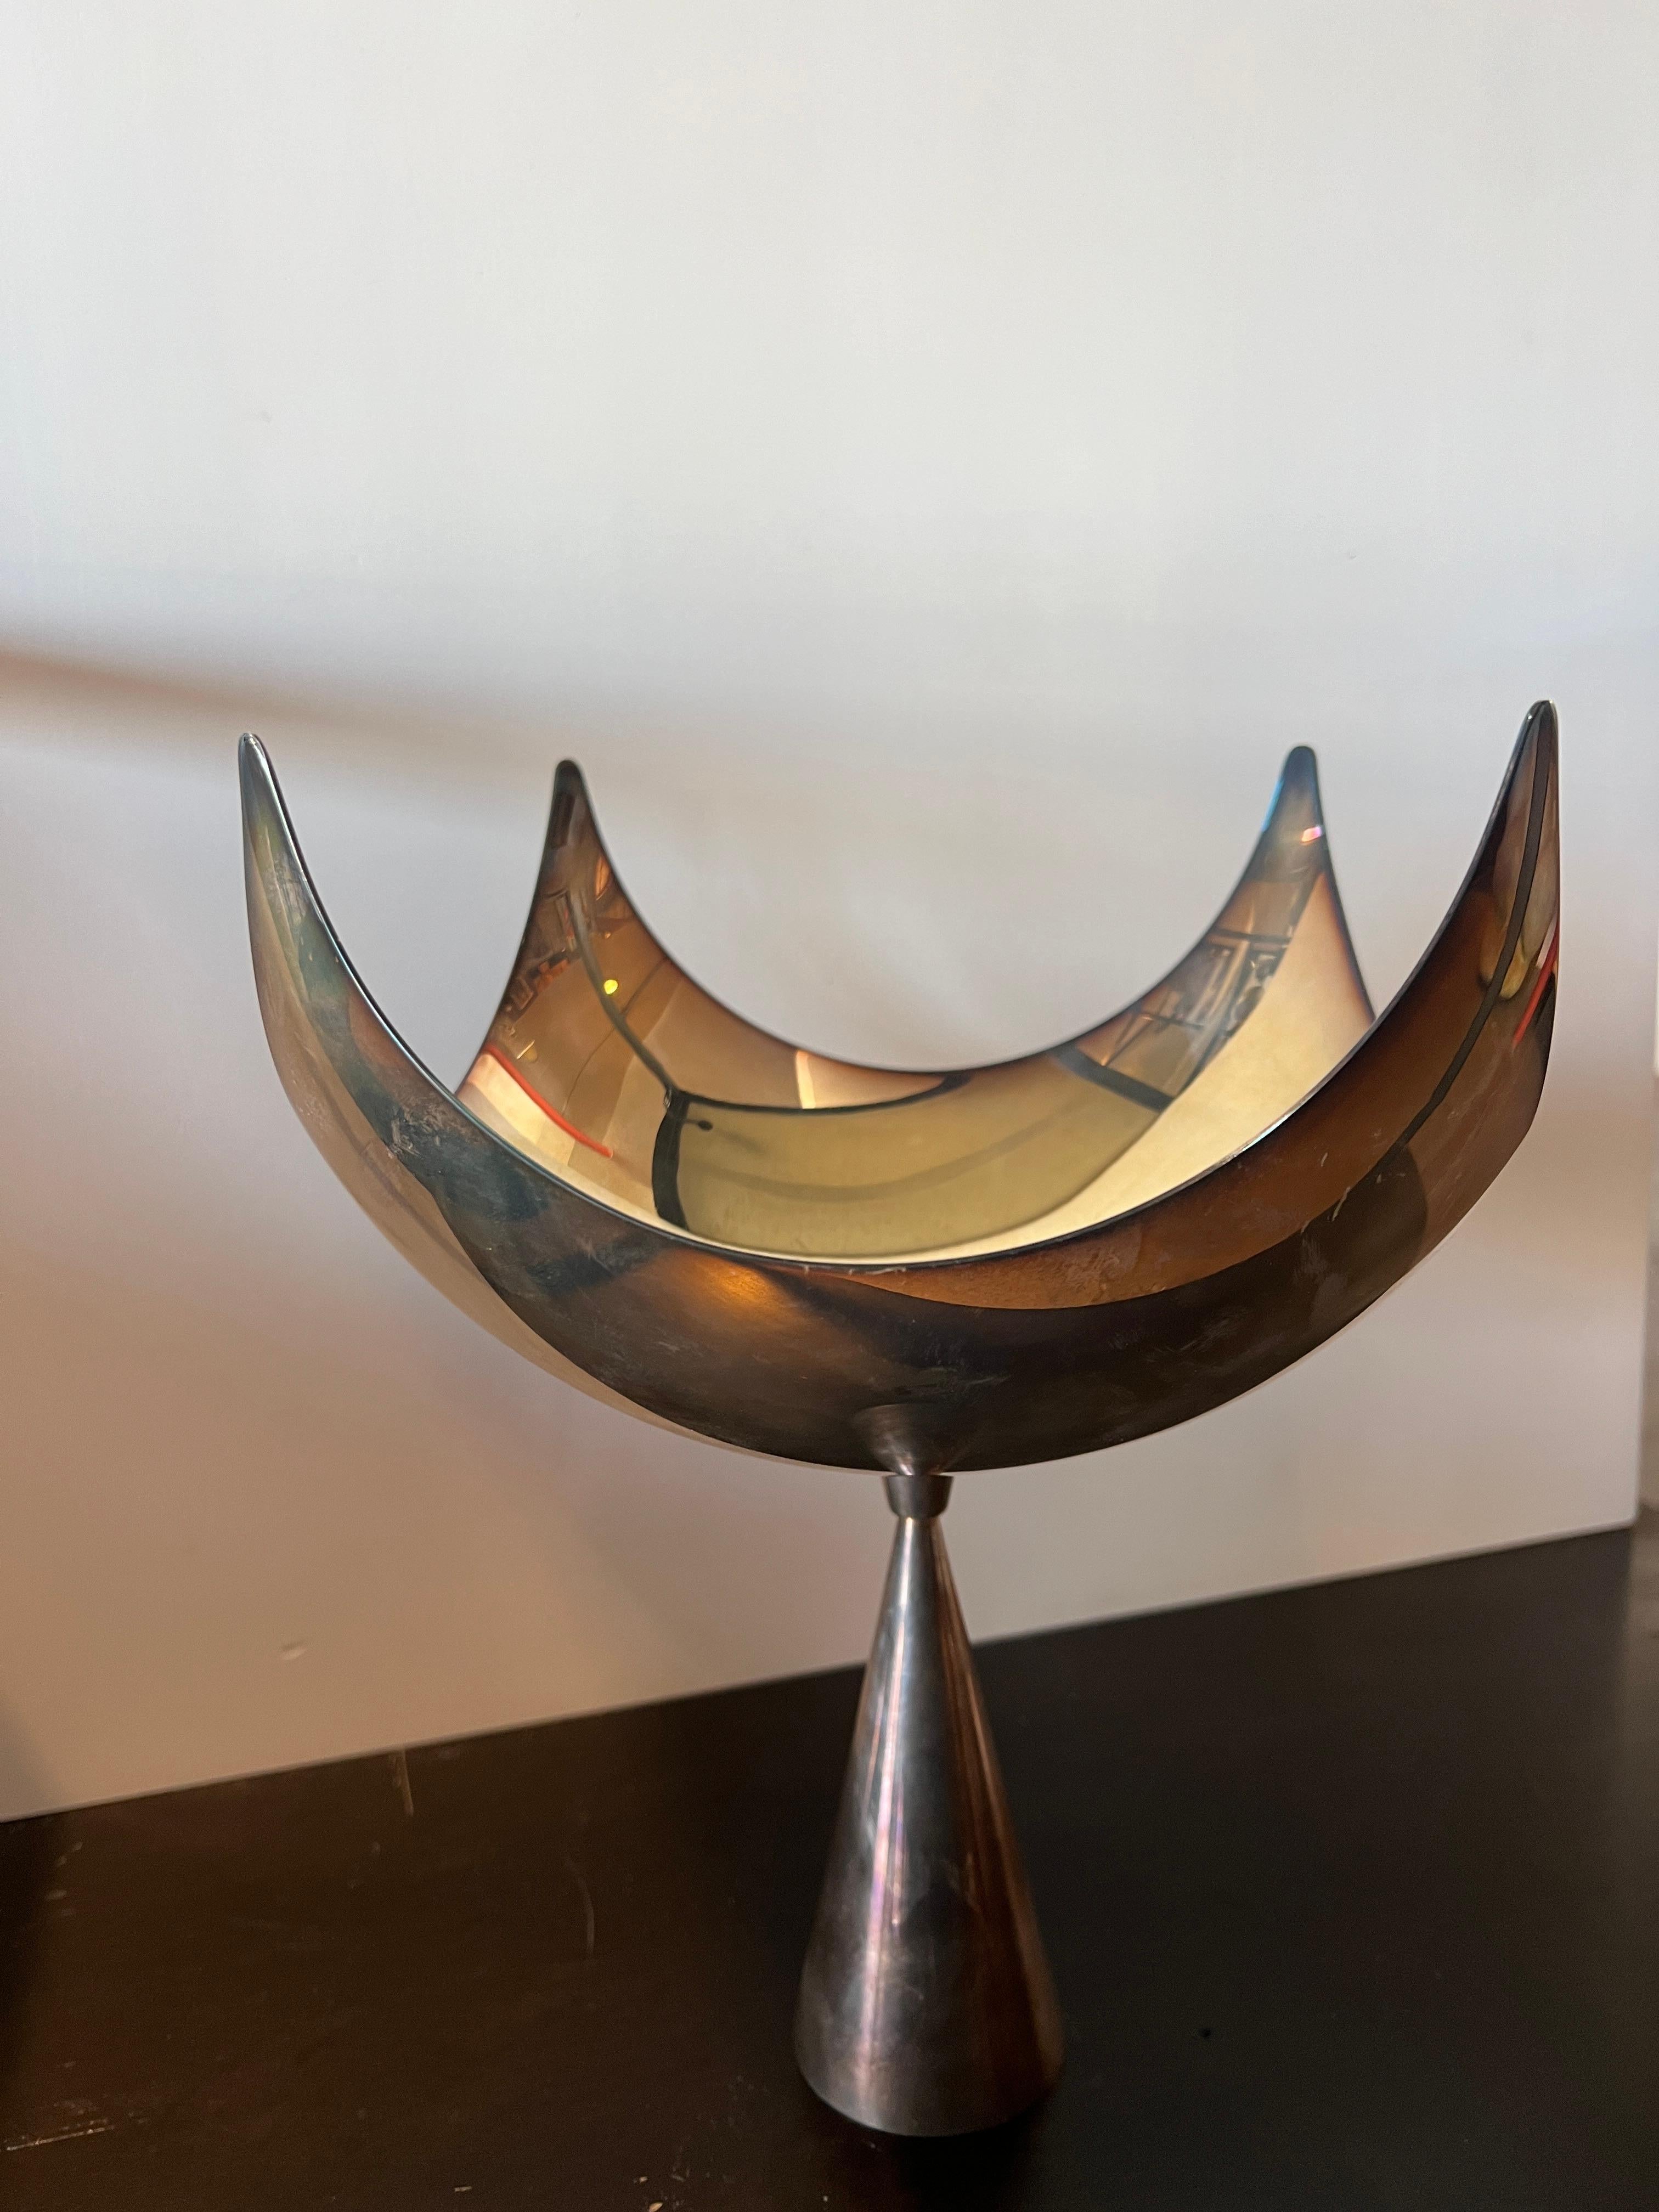 Sculptural mid-century modern silver bowl set upon a dynamic stem by Mesa. Has some patina and can easily be mirror polished.